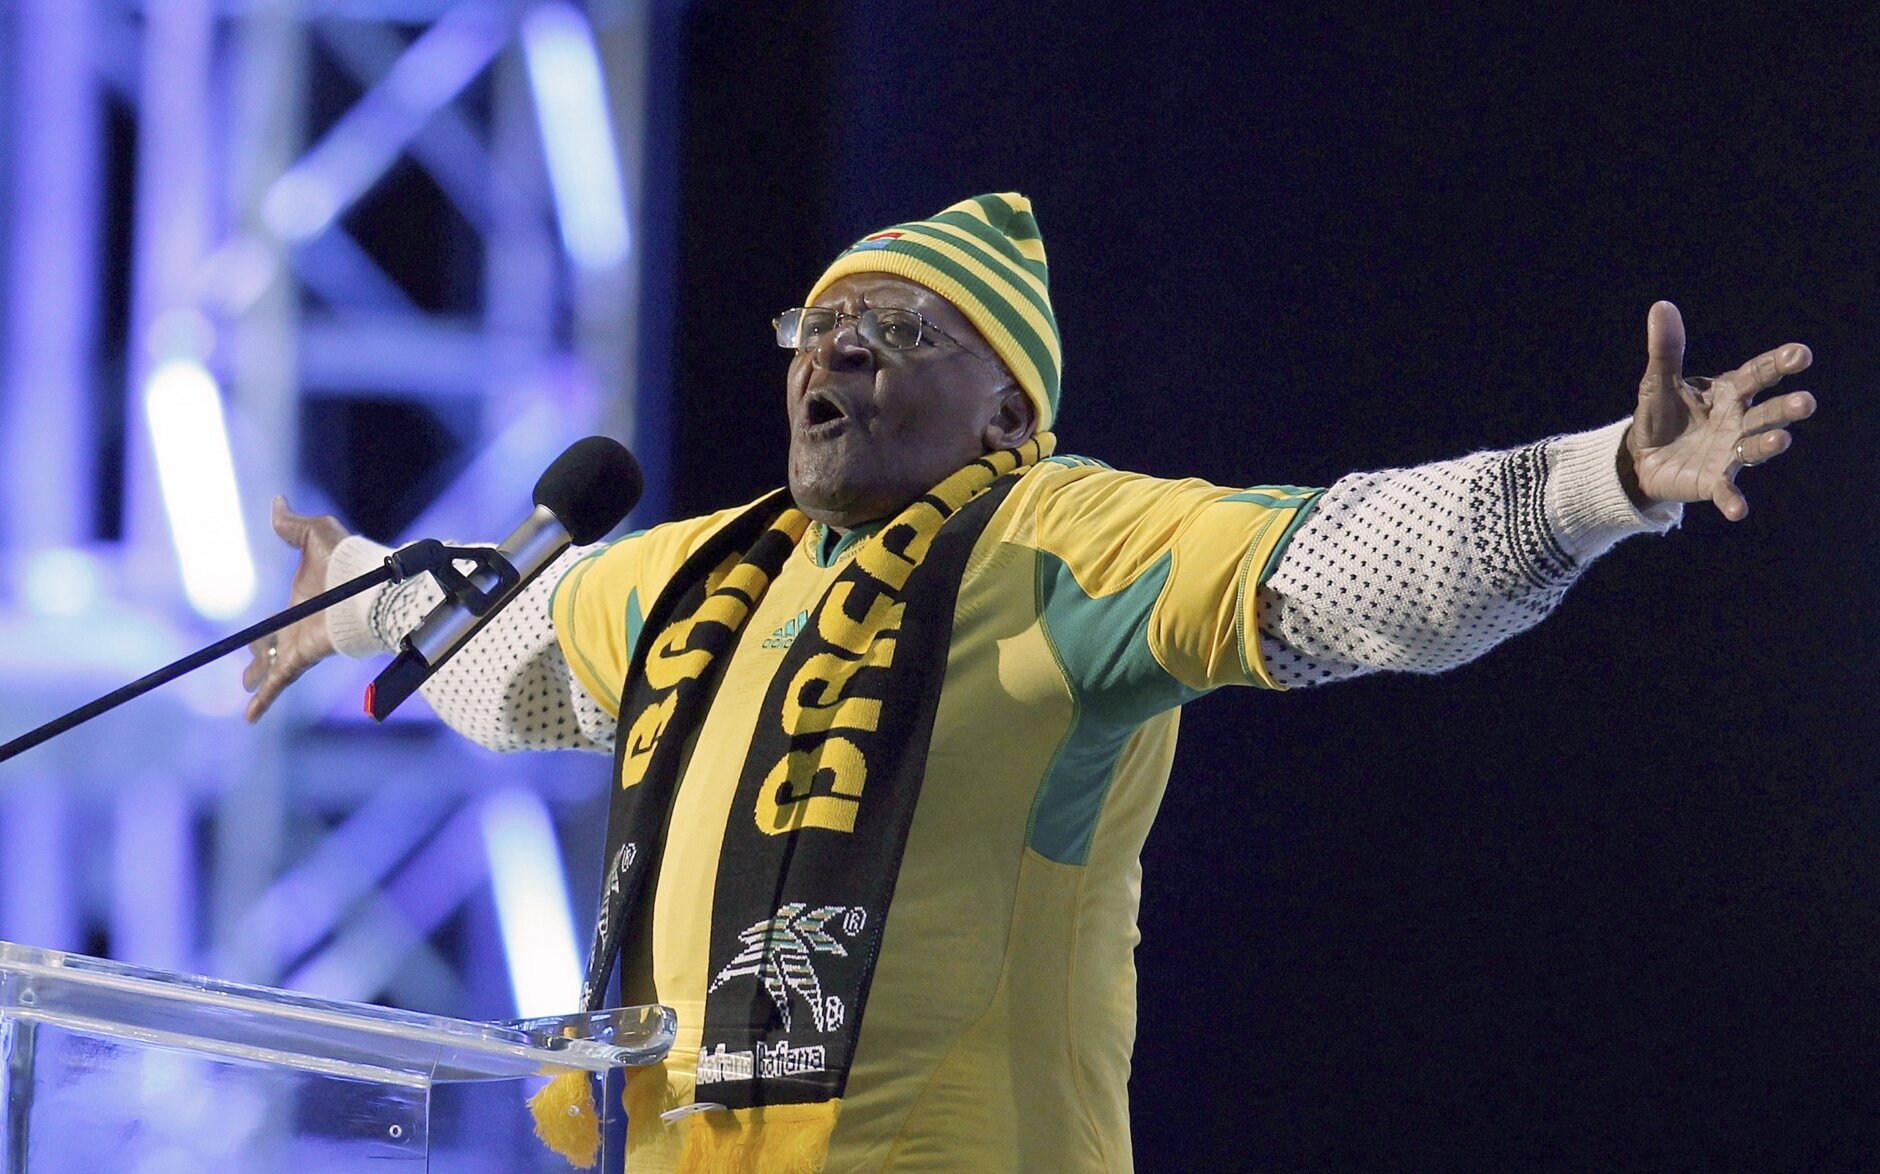 <p>In this 2010 file photo, Desmond Tutu gestures during the opening concert for the World Cup at Orlando stadium in Soweto, South Africa.</p>
